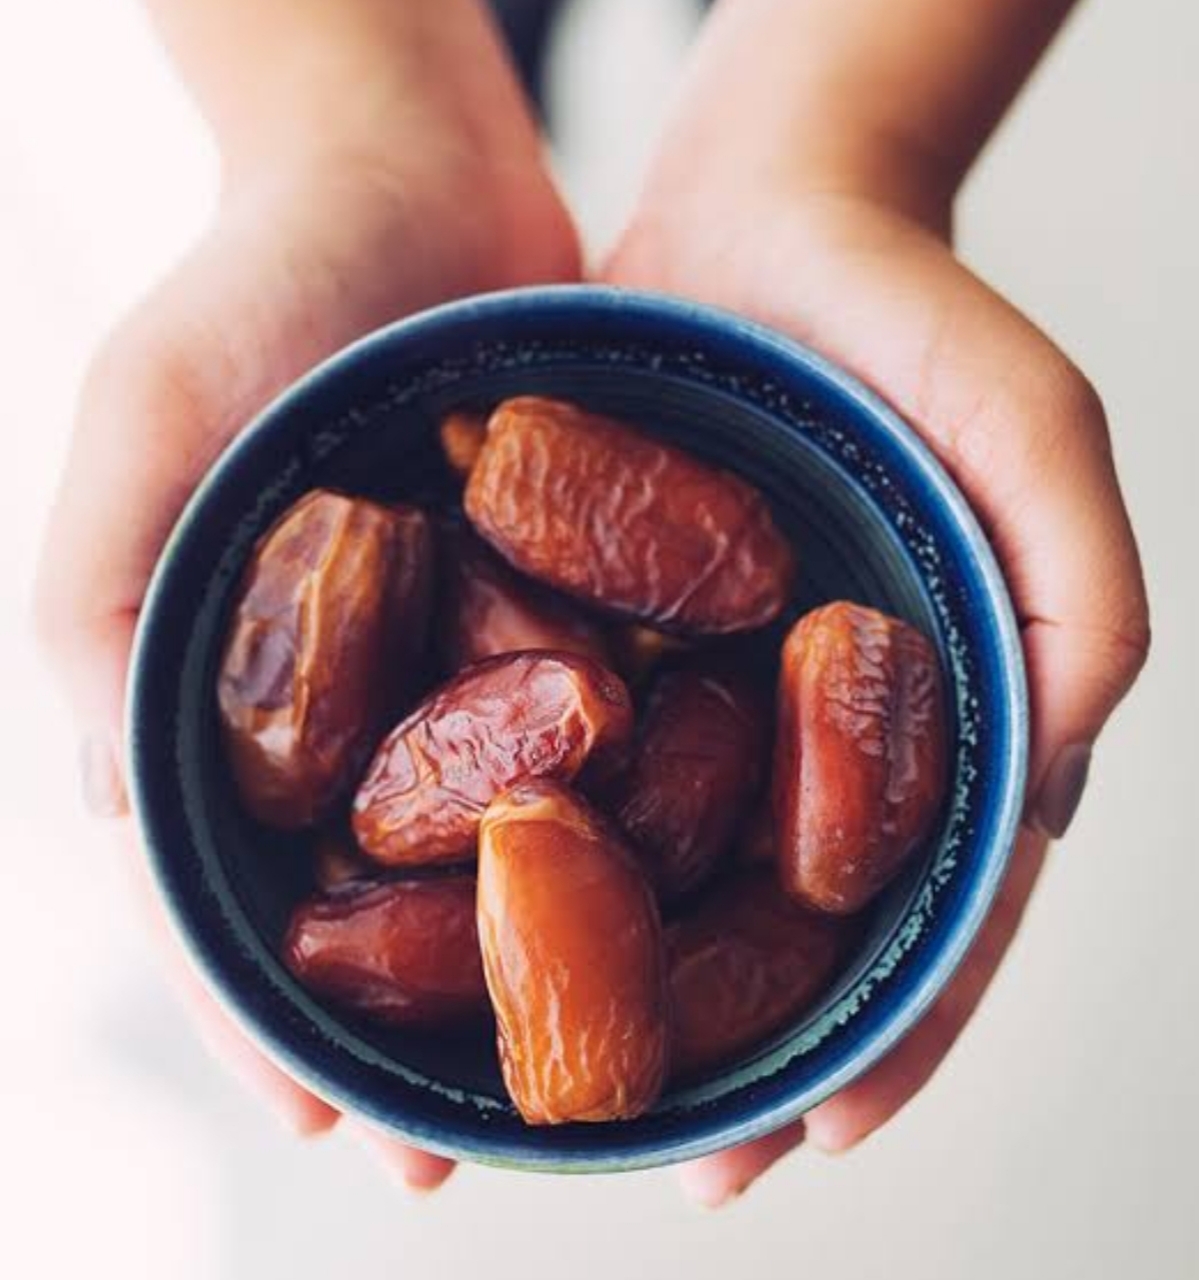 Dried dates calories and their benefits